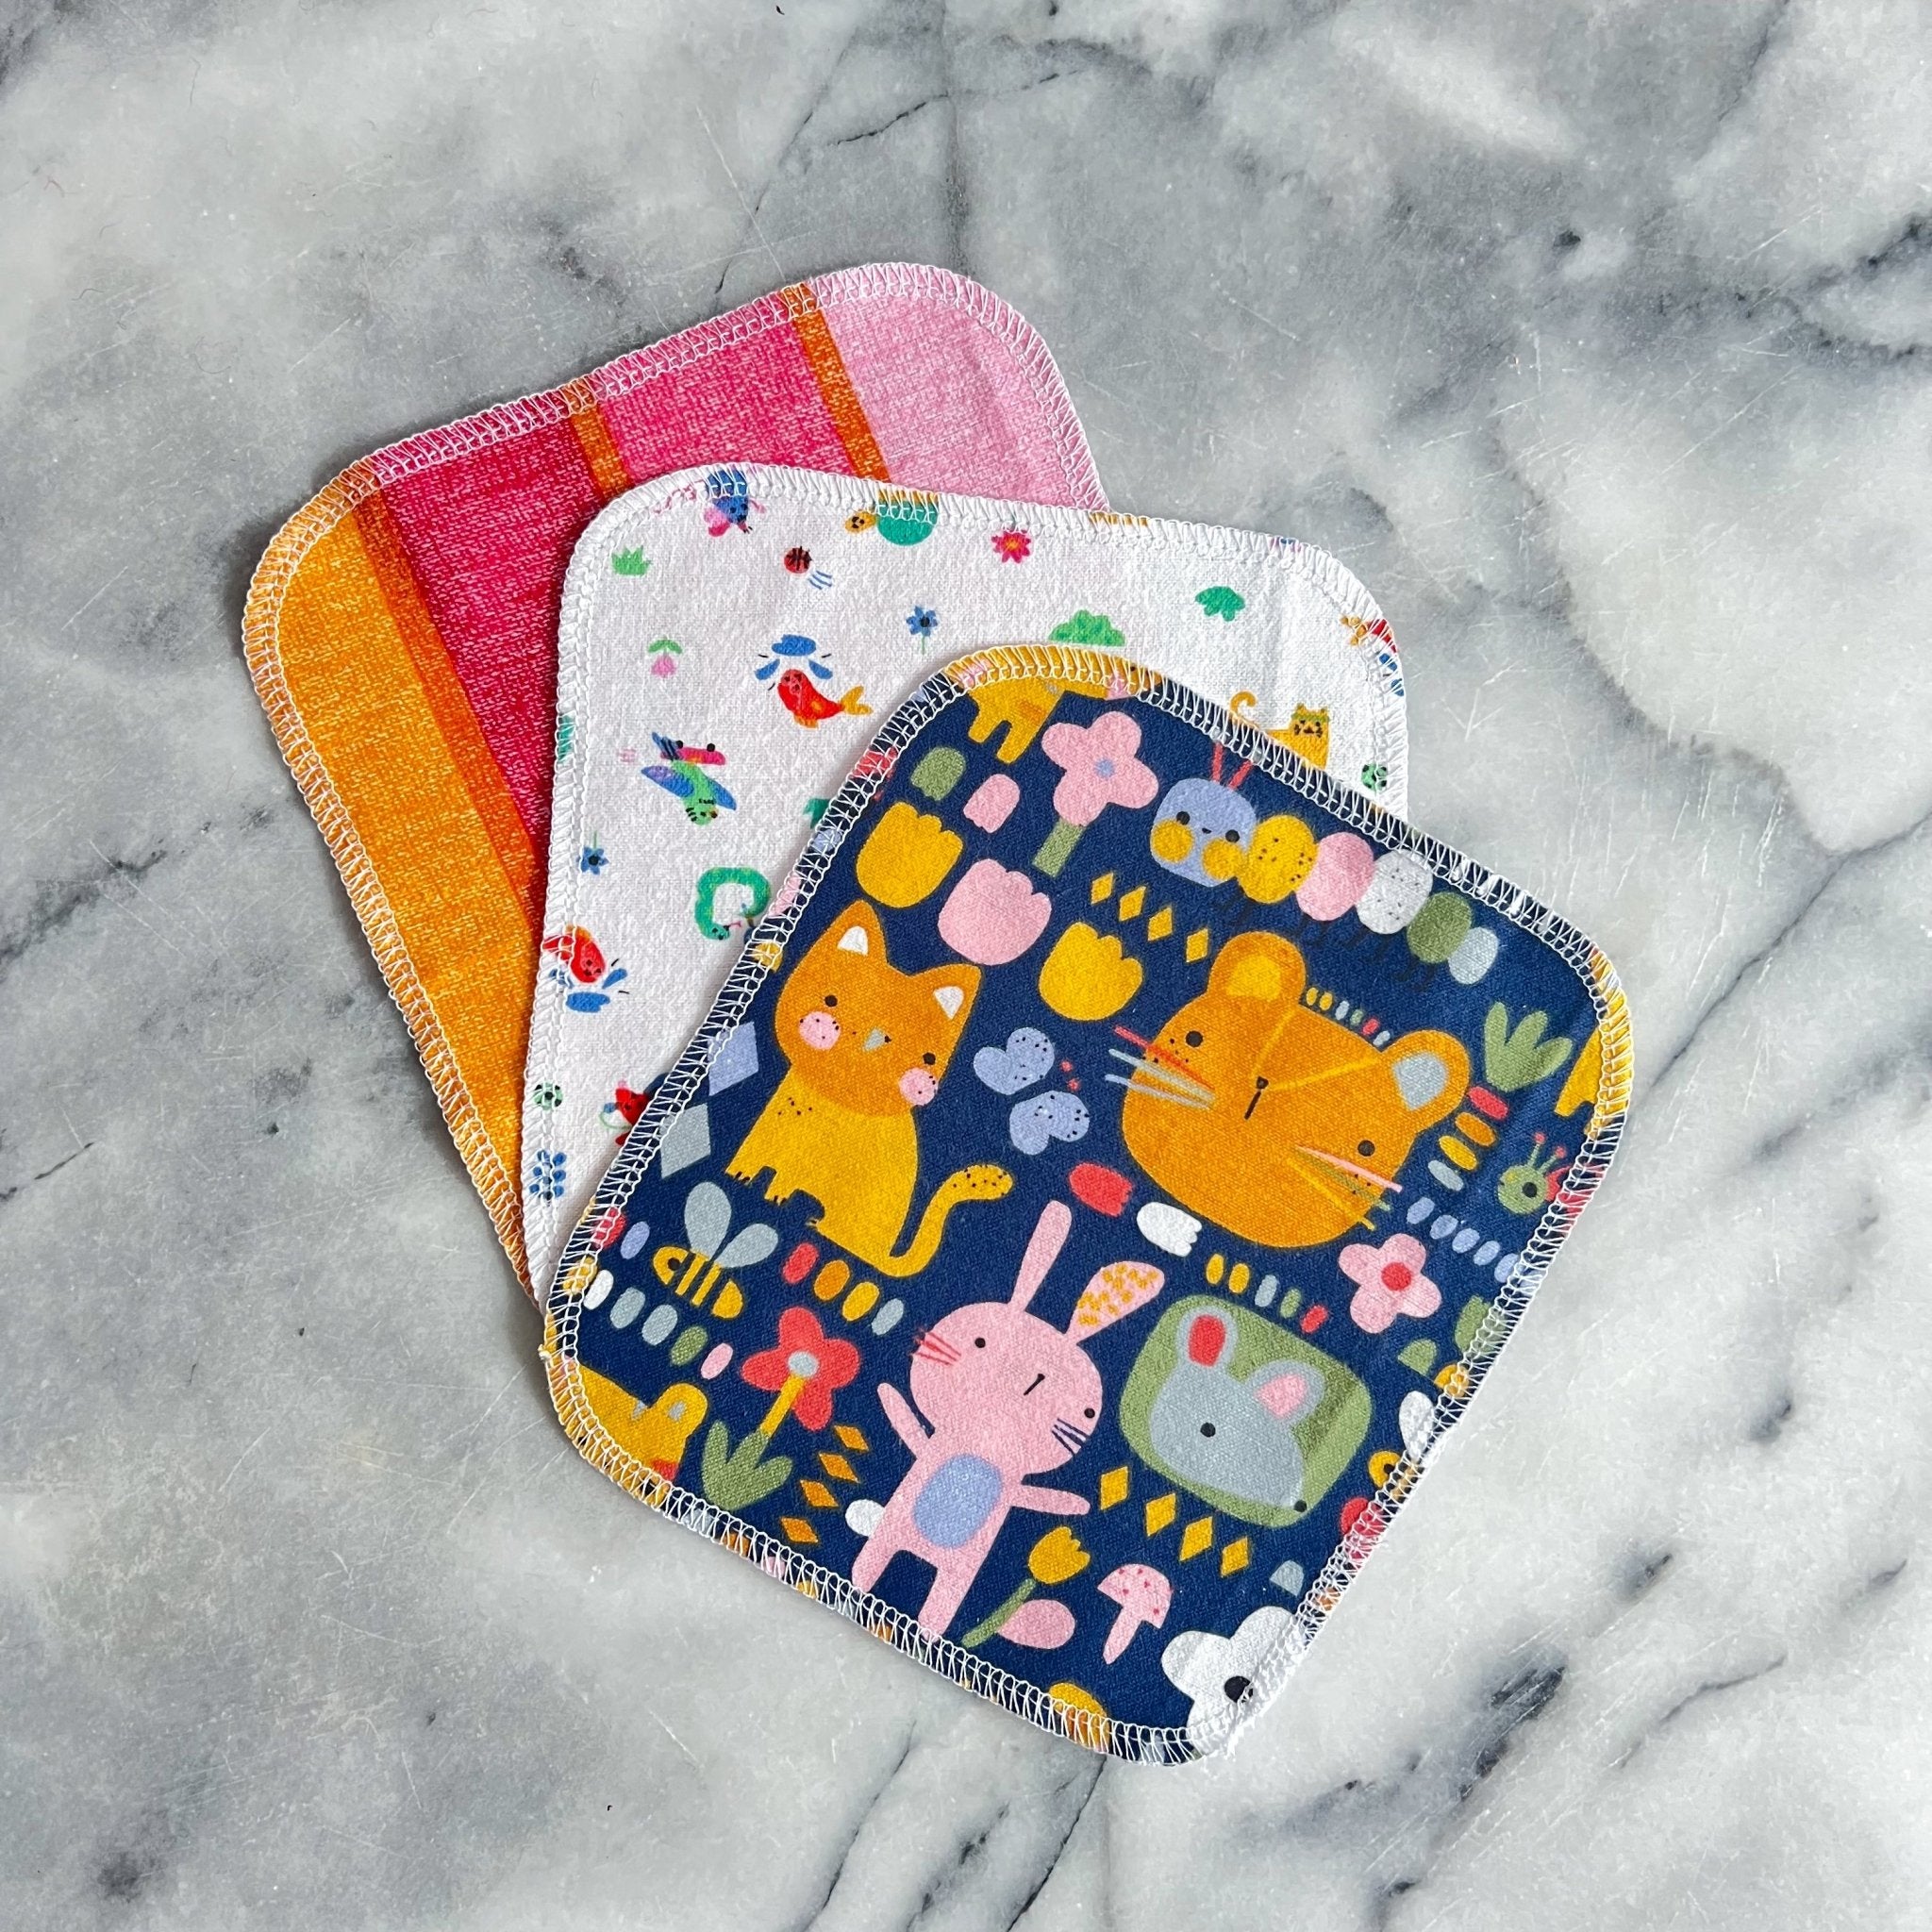 **Overstock** Cloth Wipes: Themed Prints - Marley's Monsters